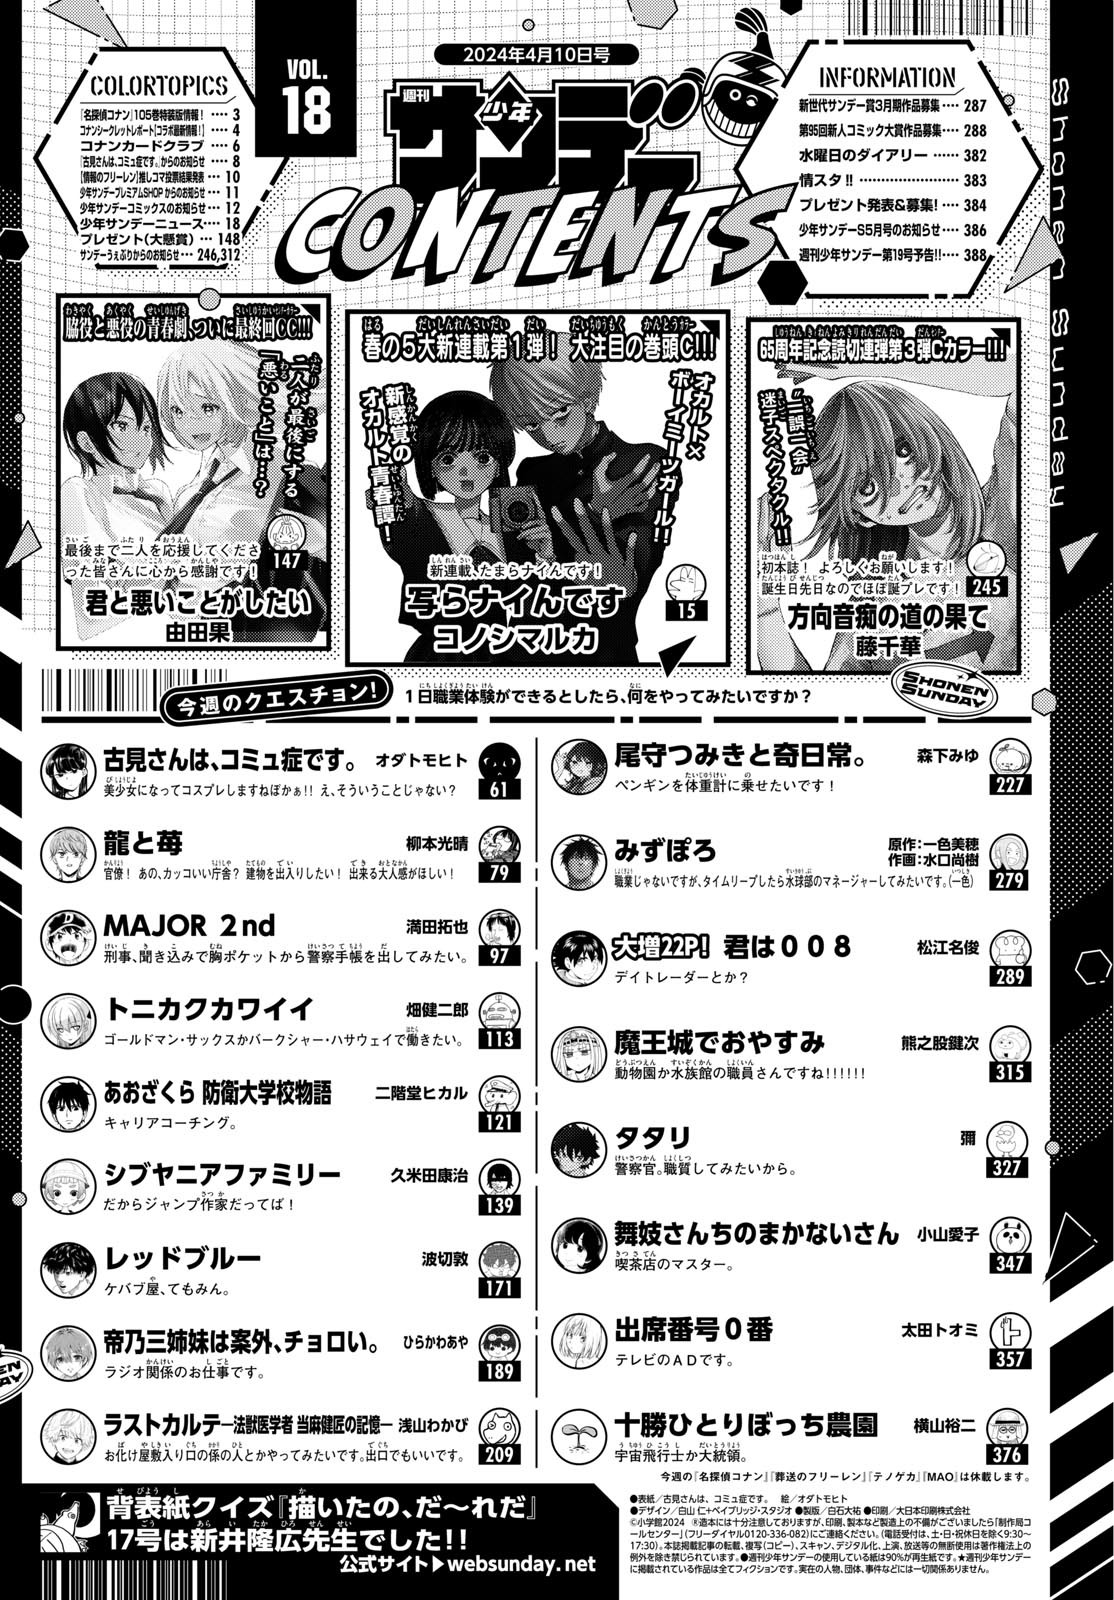 Weekly Shōnen Sunday - 週刊少年サンデー - Chapter 2024-18 - Page 2